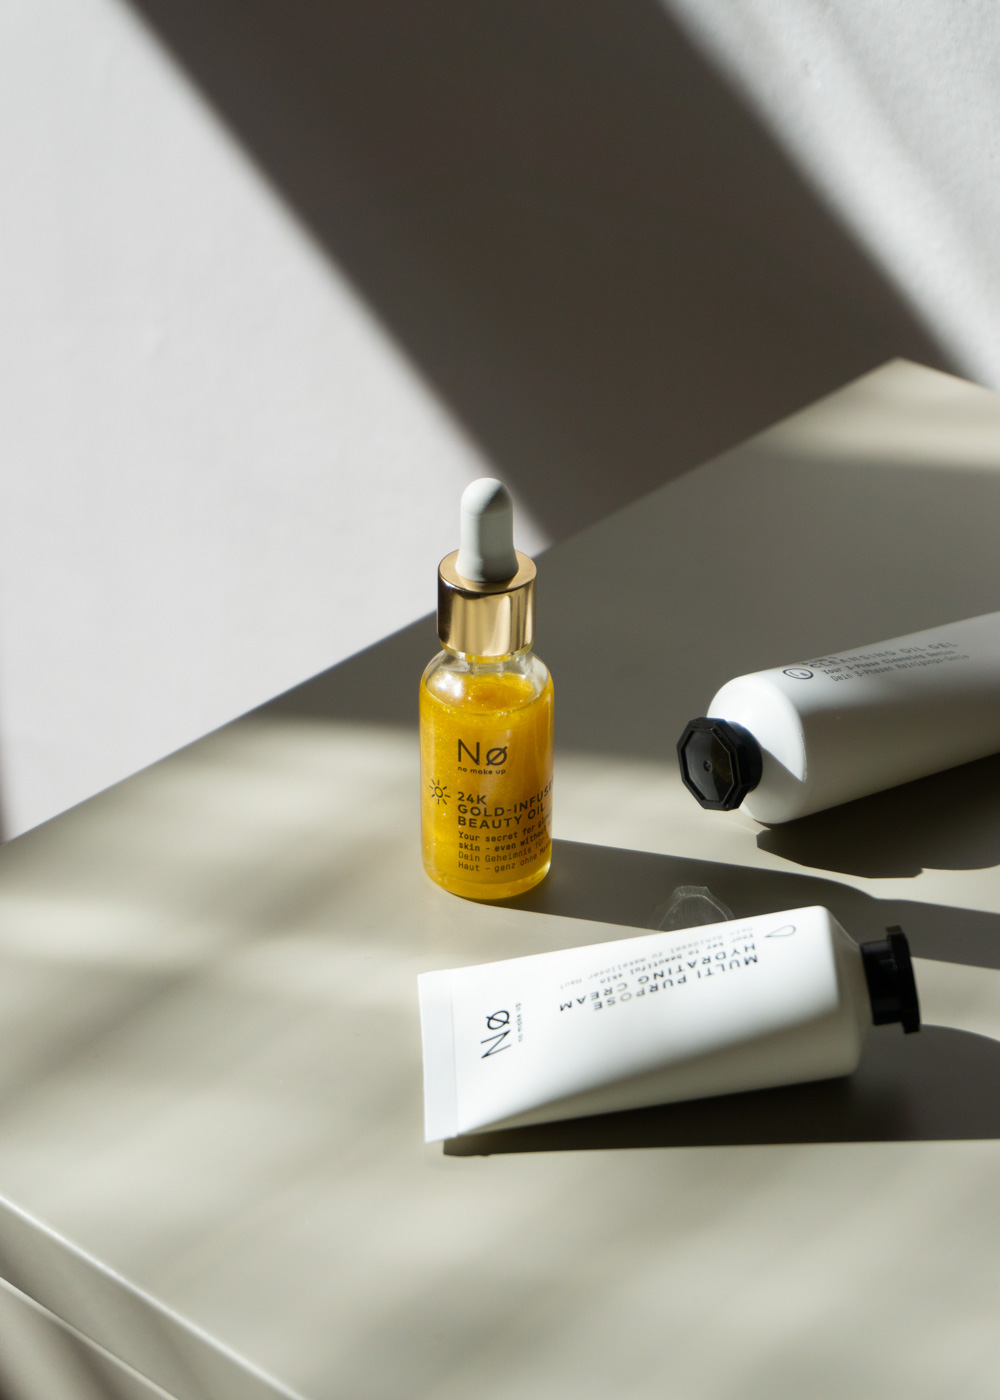 No Cosmetics - Minimalist Skincare, Simple Everyday Beauty | Product Photography, Packaging Design, Shadow Play, Lighting, Vegan Cosmetics | RG Daily Blog